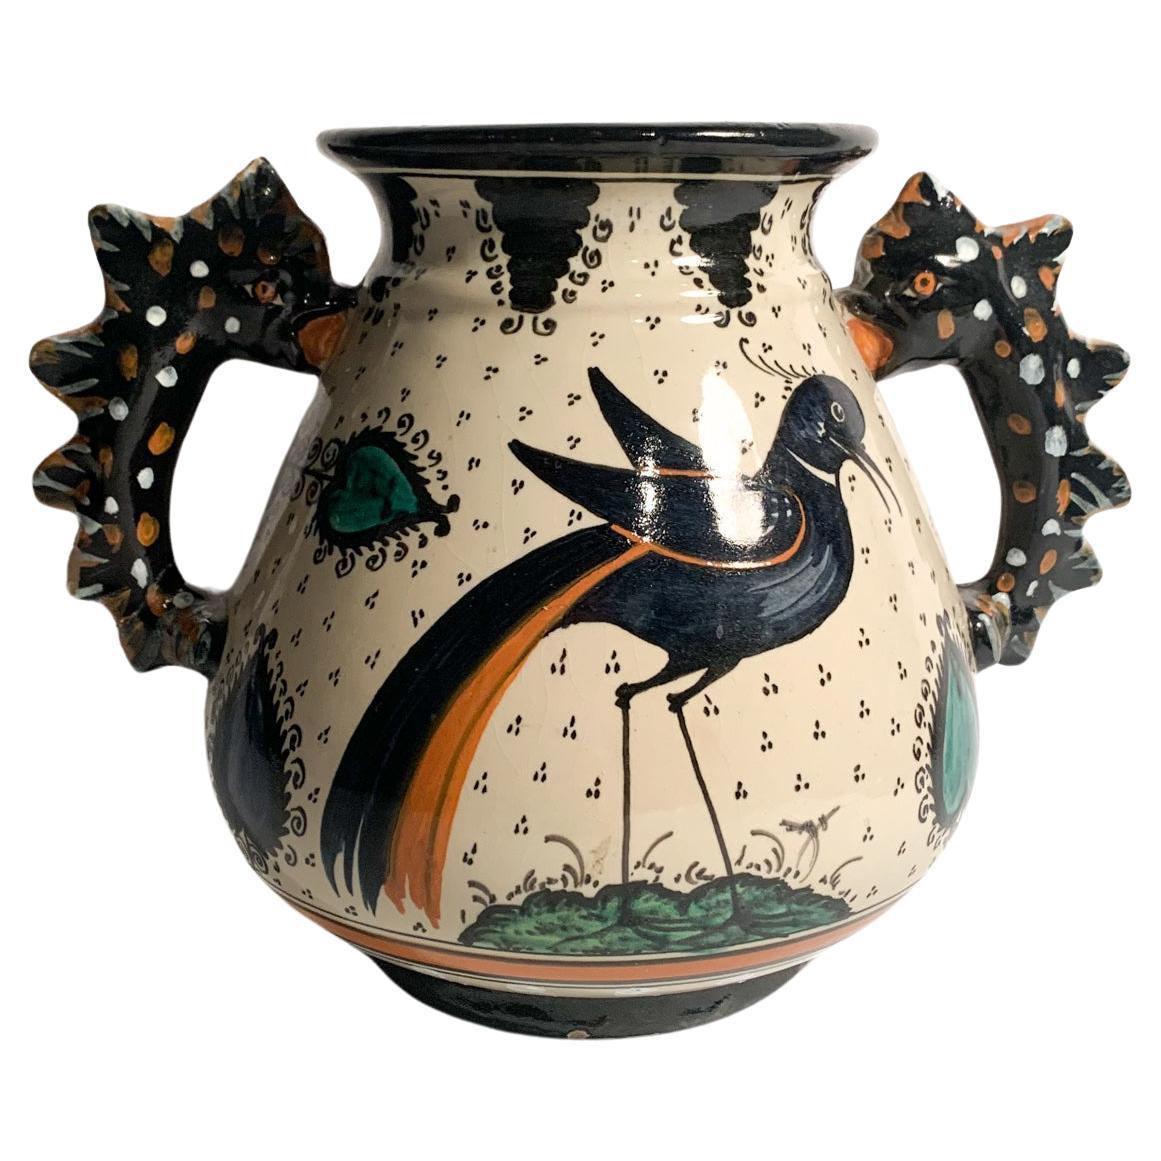 Hand-Painted Ceramic Vase by Molaroni Pesaro from the 1950s